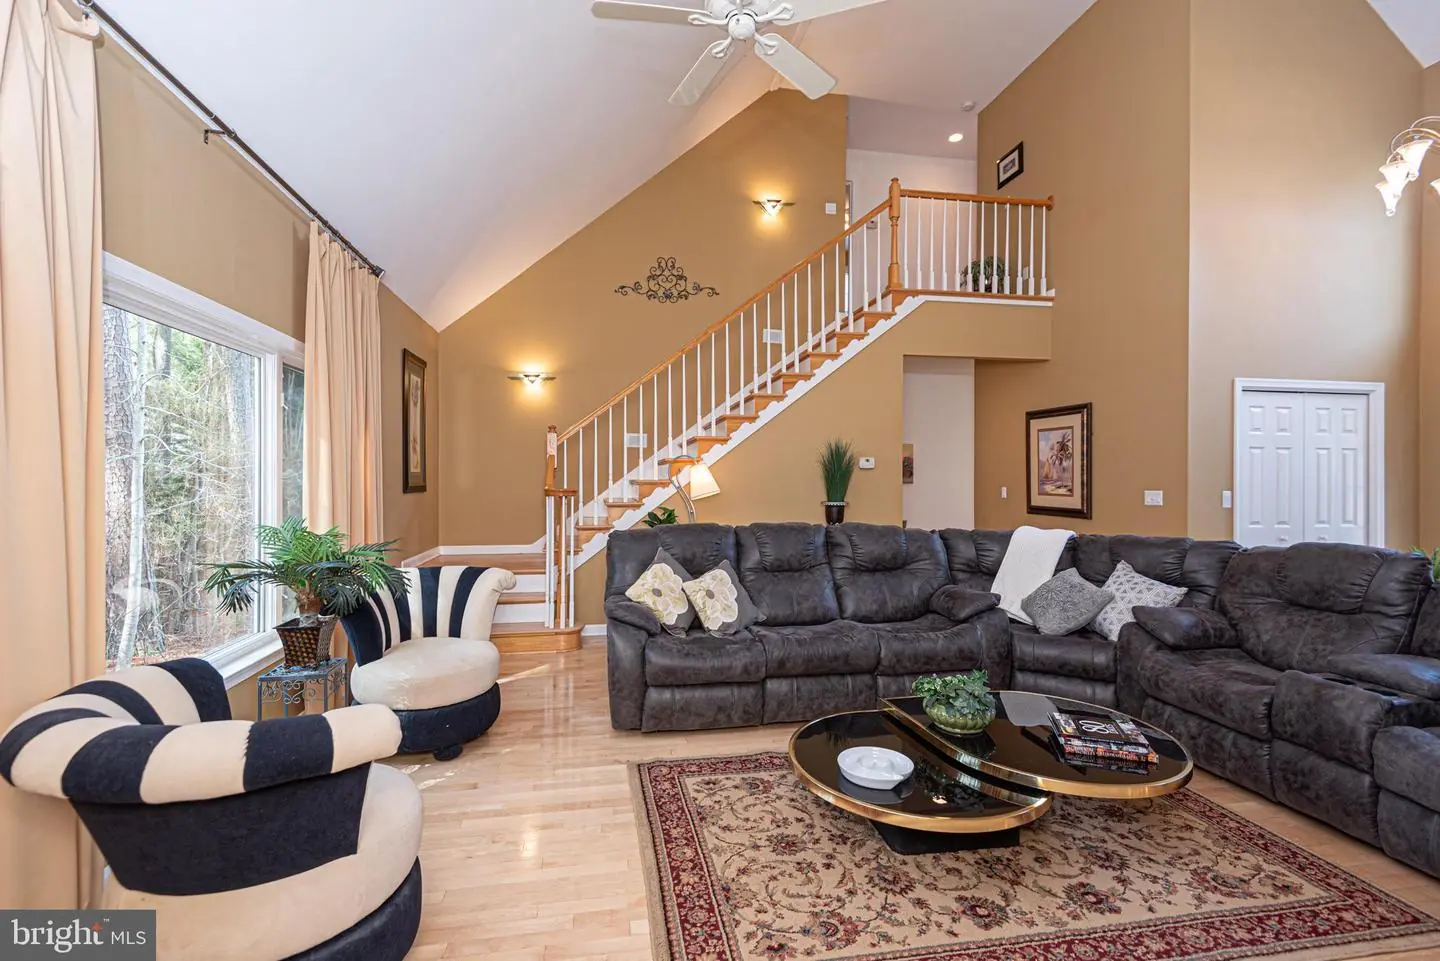 MDWO2019426-802903995262-2024-03-08-00-14-50 106 Pine Forest Dr | Berlin, MD Real Estate For Sale | MLS# Mdwo2019426  - 1st Choice Properties